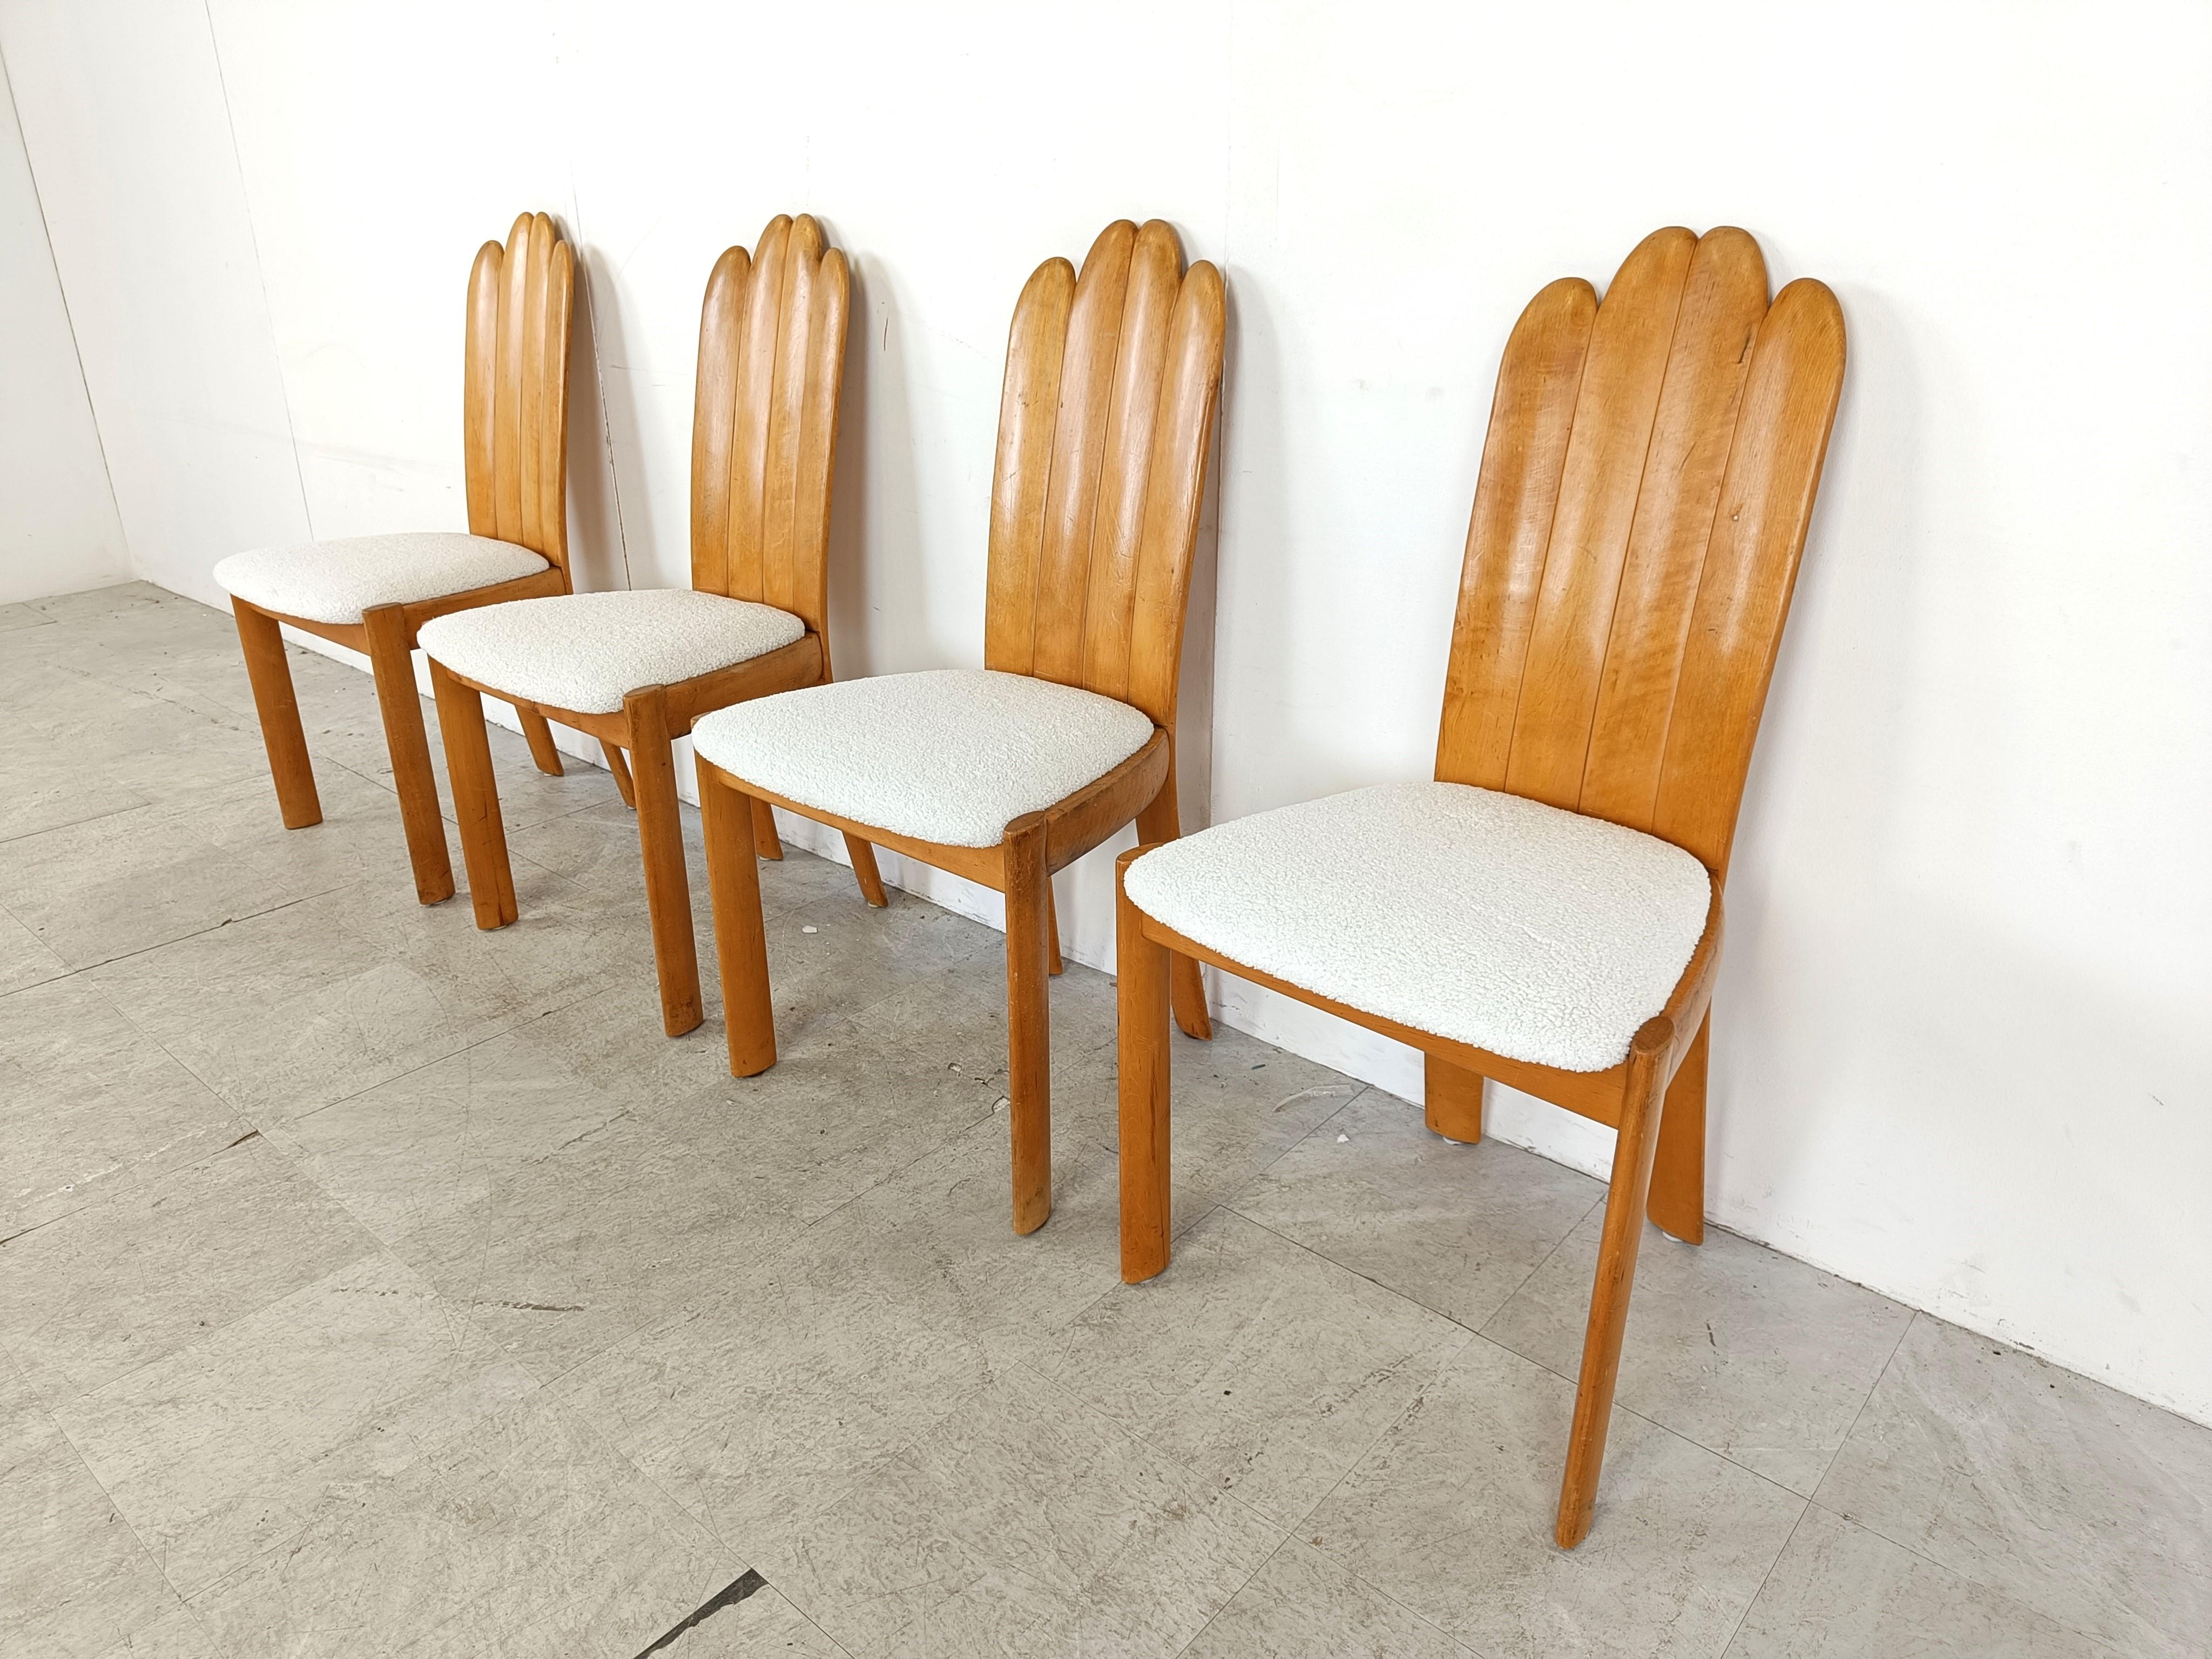 Mid-20th Century Set of 4 scandinavian dining chairs by Vamdrup Stolefabrik, 1960s For Sale